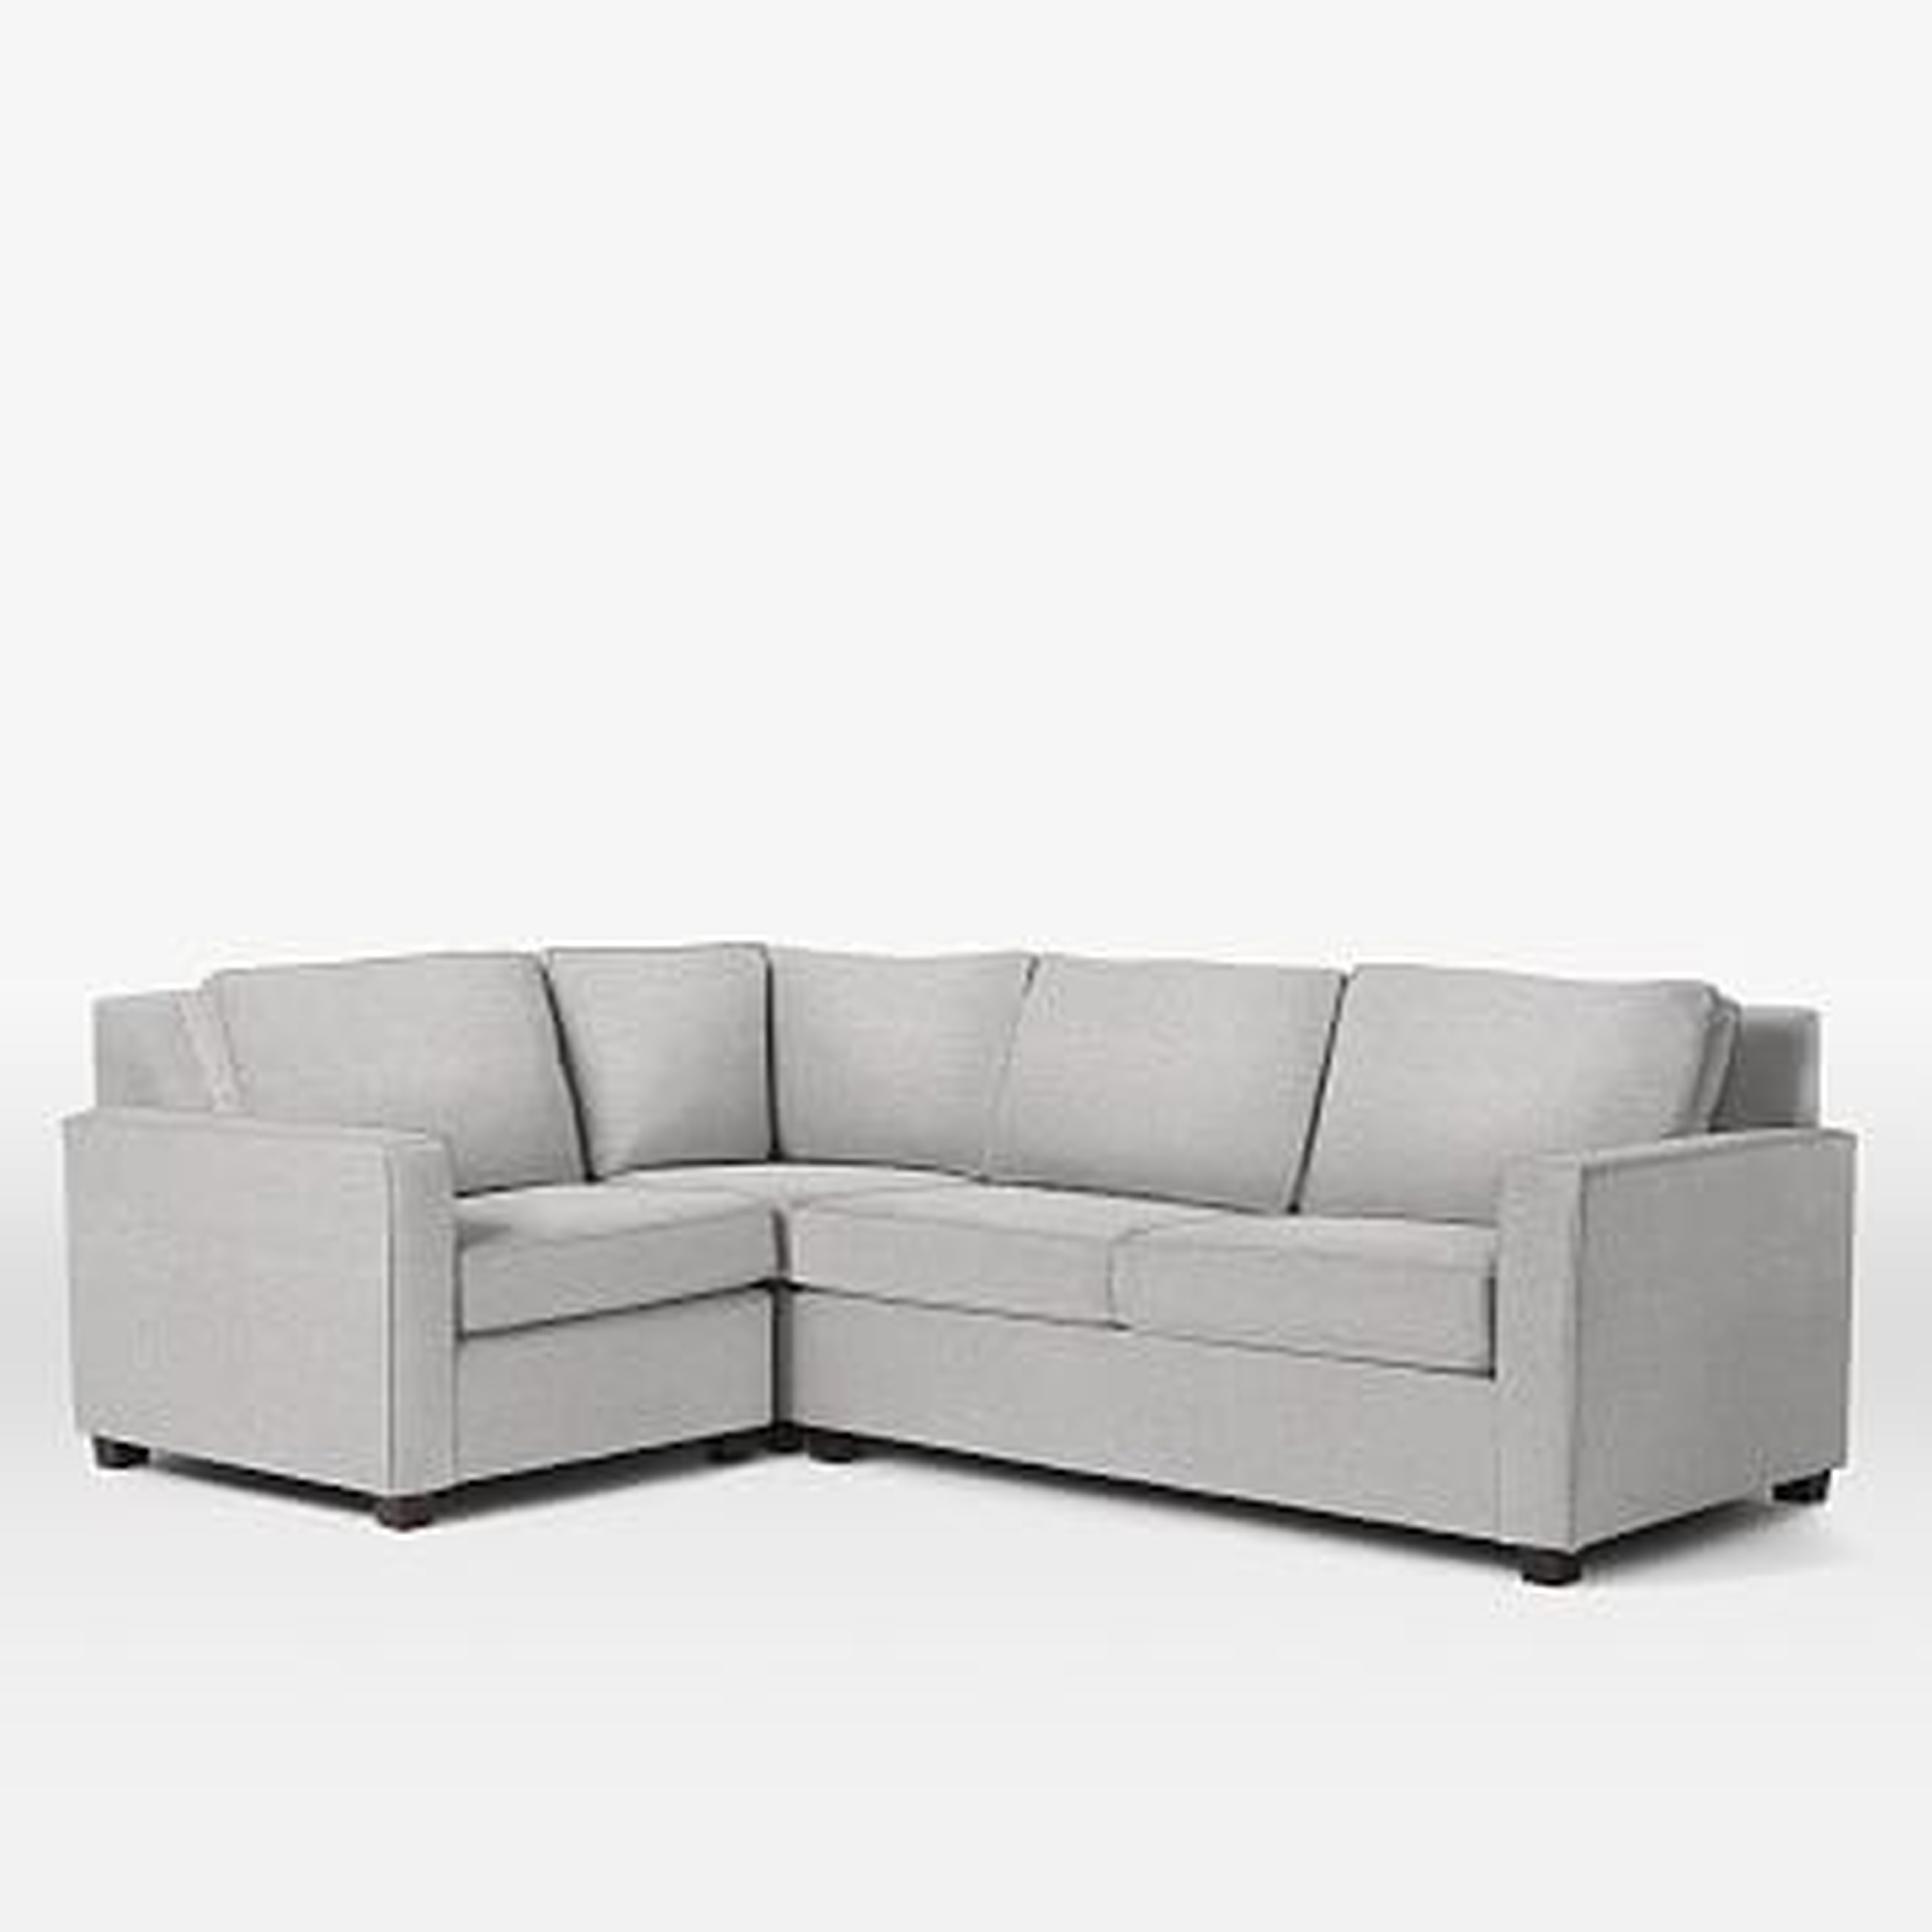 Henry Set 3- (Corner, Right Arm Loveseat, Left Arm Chair), Chenille Tweed, Frost Gray - West Elm